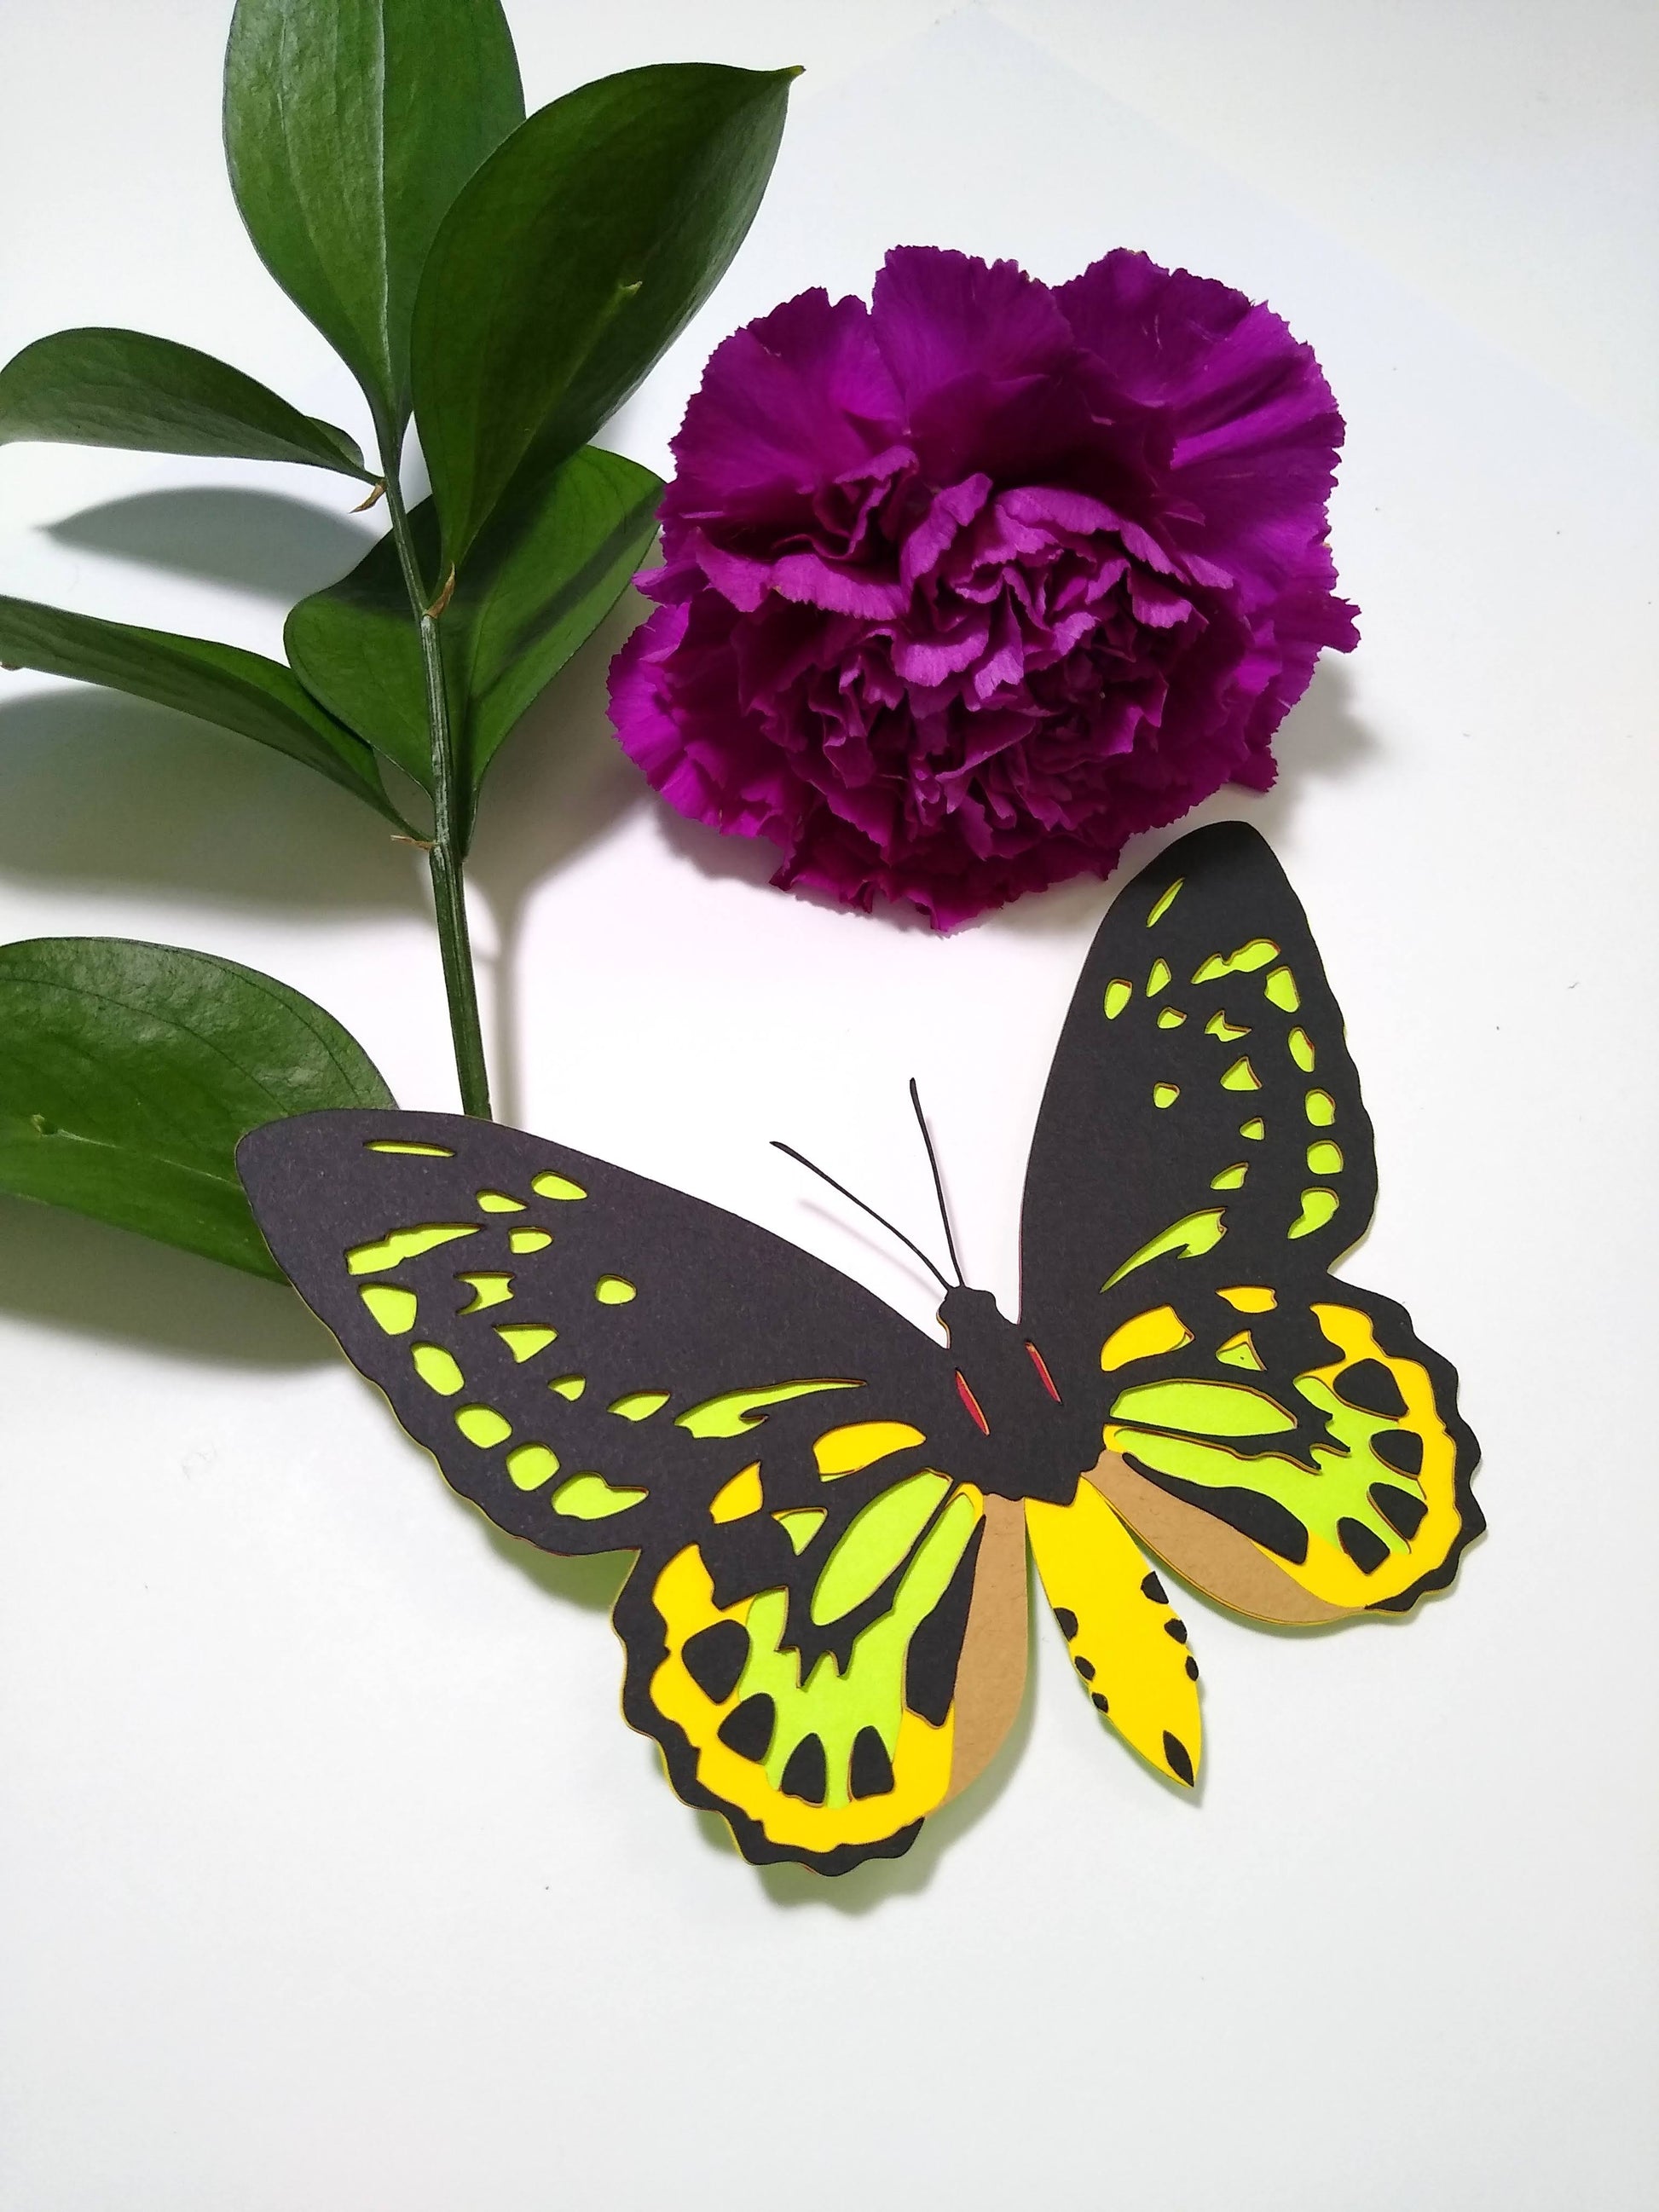 A multi-layered paper butterfly rests on a table. It is in the design of the back of a Cairns Birdwing butterfly. It rests below sprigs of leaves and two purple flowers.